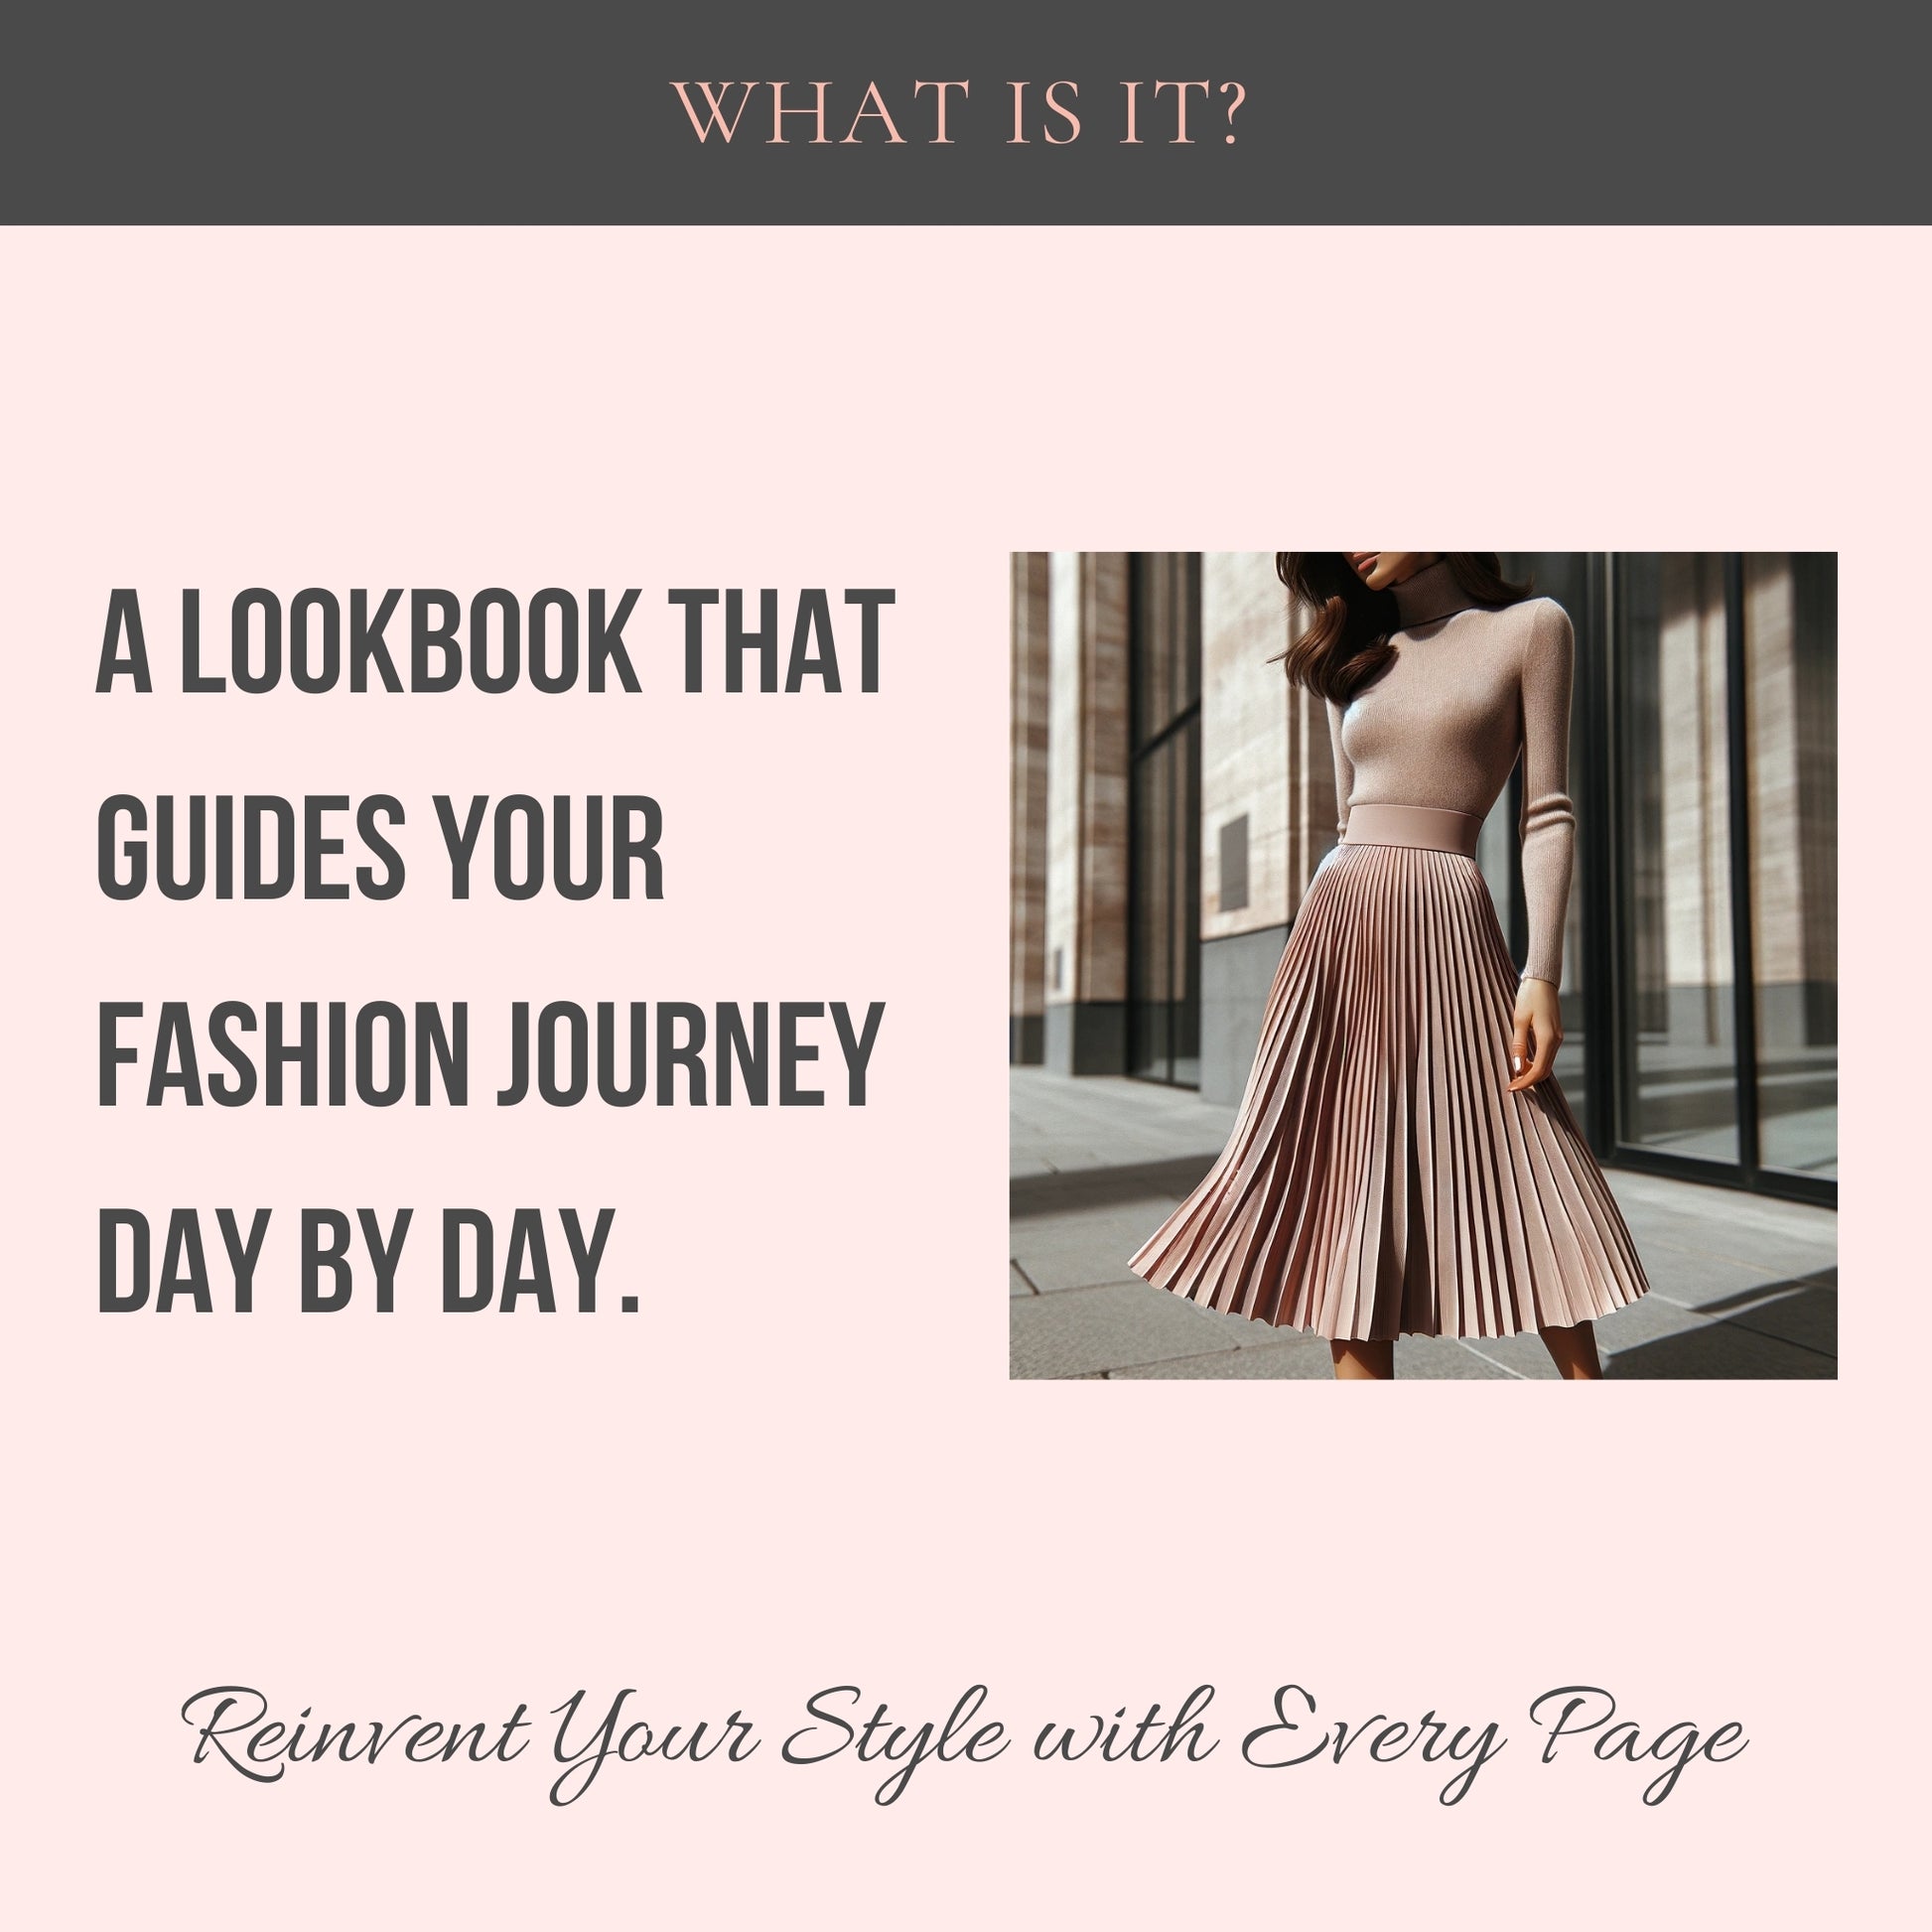 Top center: What is it? Middle center: A lookbook that guides your fashion journey day by day. A picture of a woman wearing a monochromatic outfit, a turtleneck and a pleated midi skirt. Bottom center is written "Reinvent your style with every page"